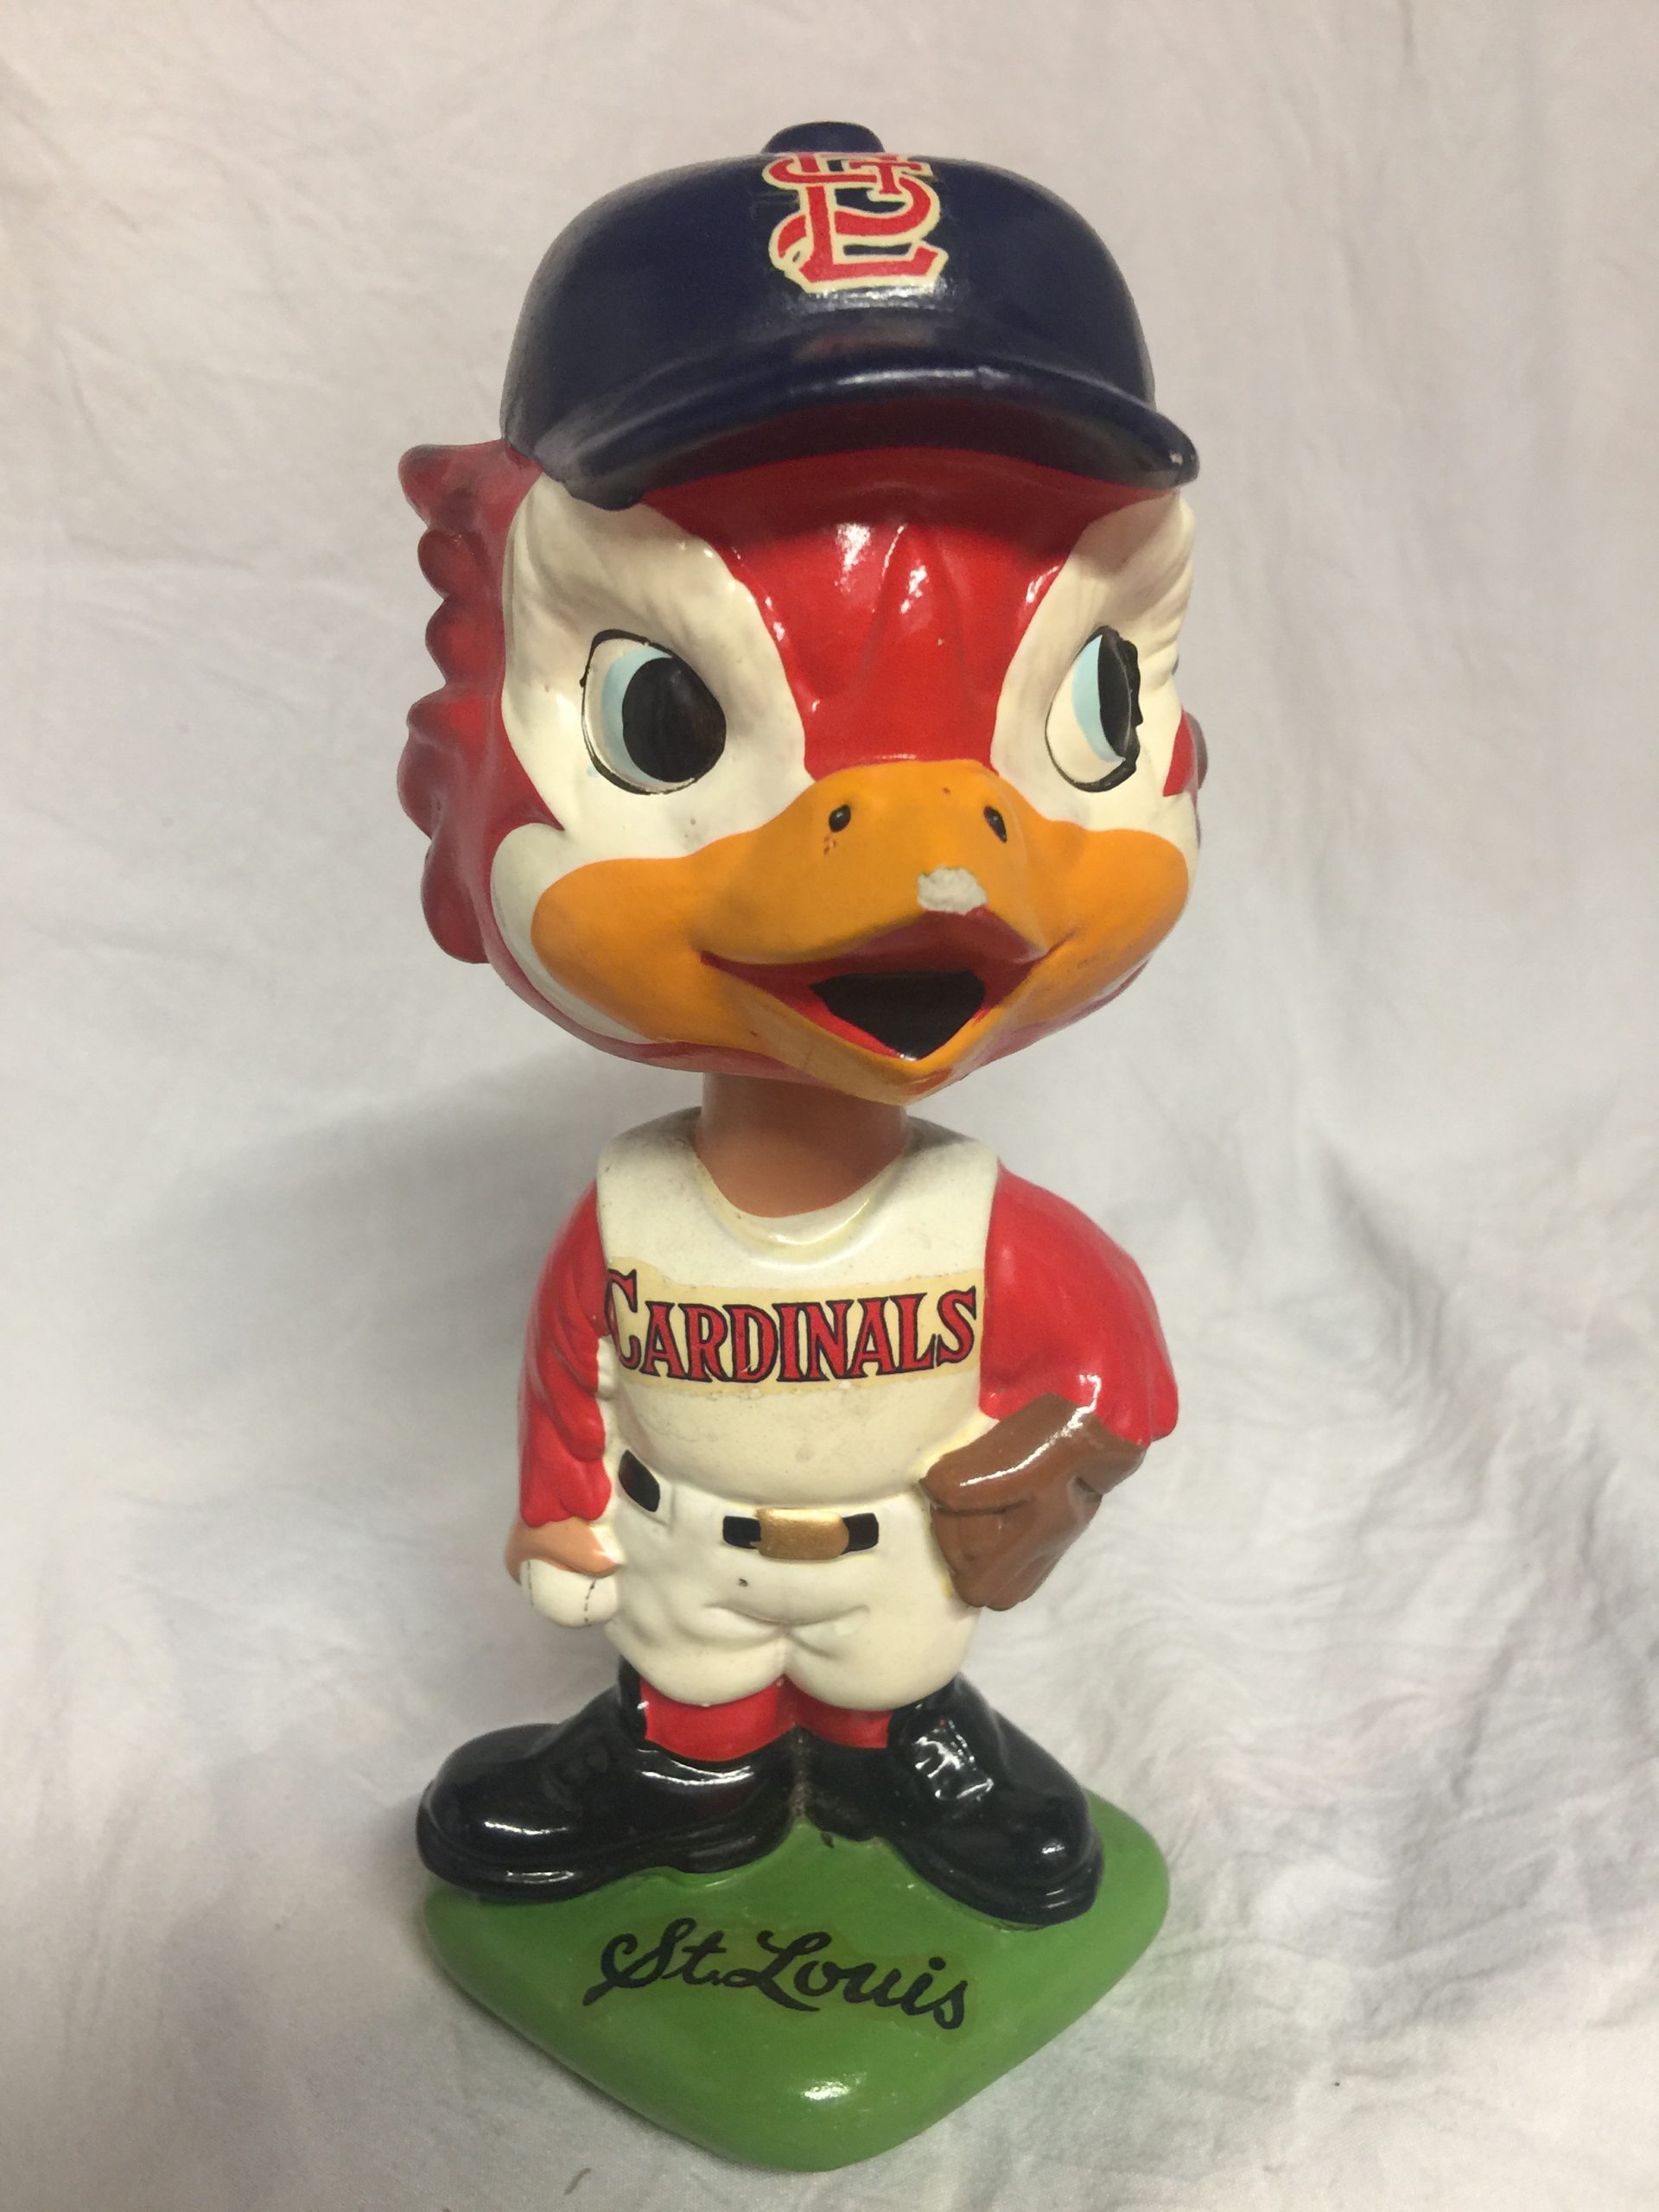 Springfield getting creative with Cardinals' bobbleheads